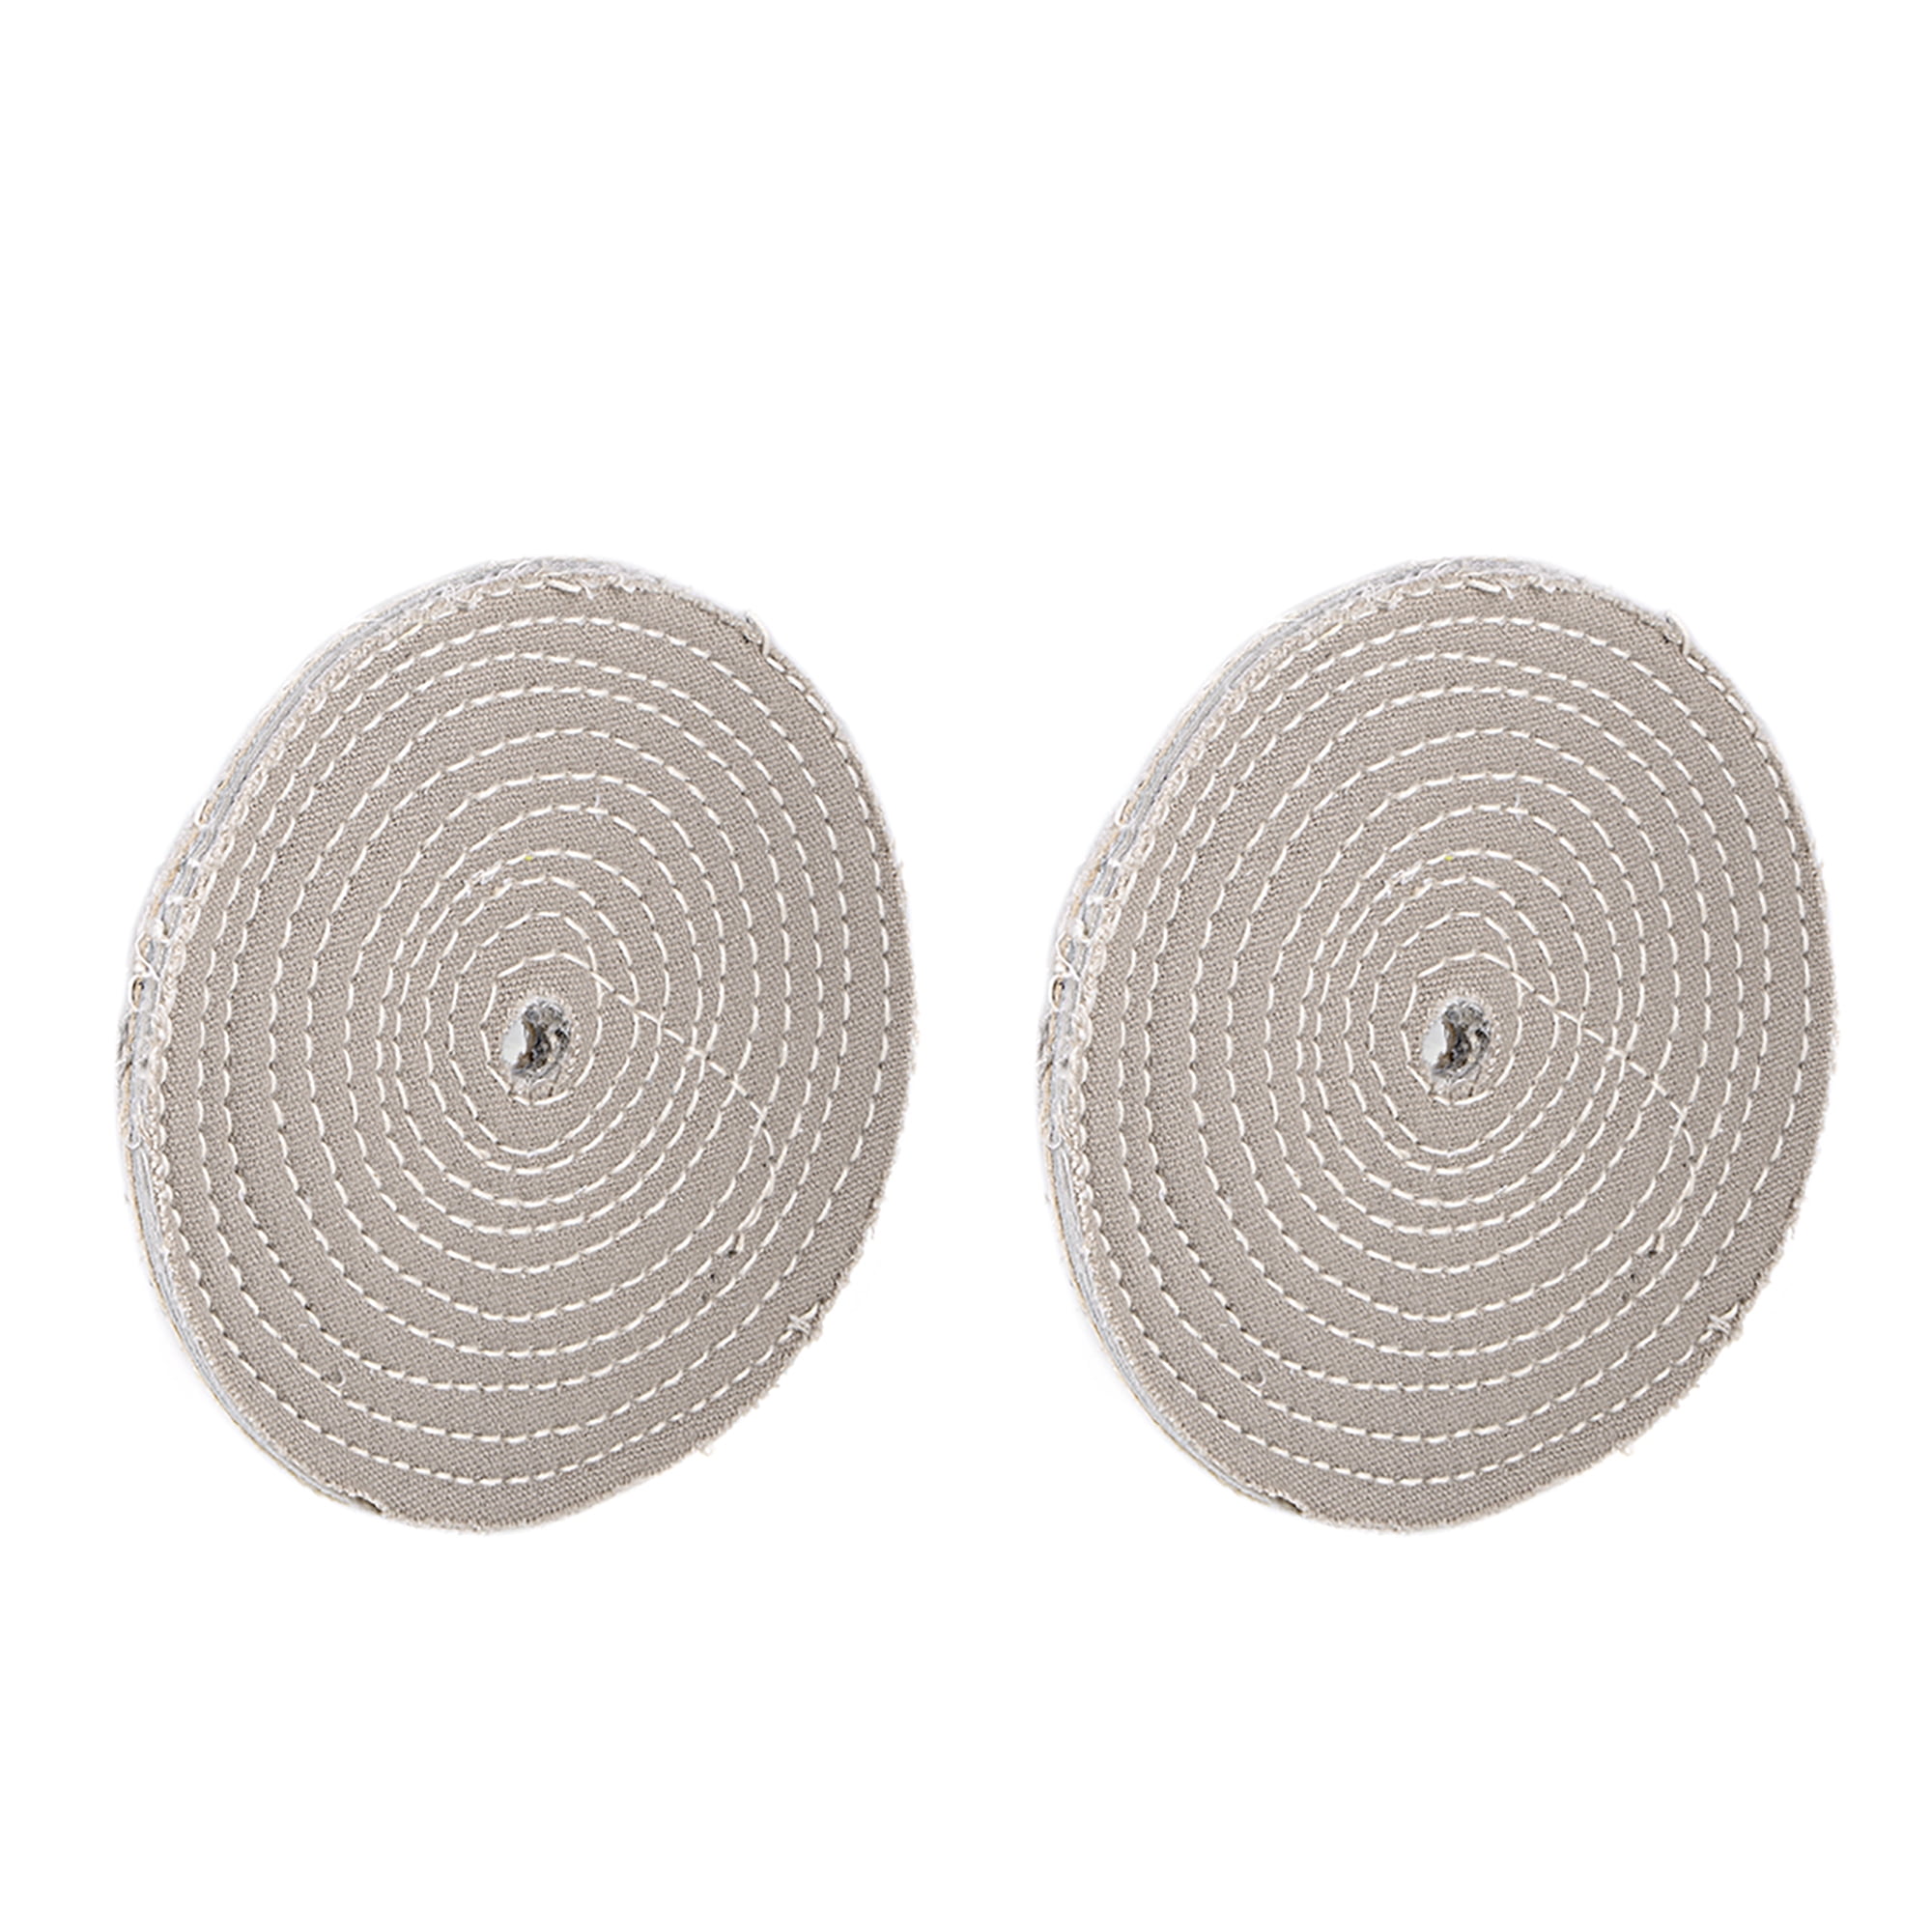 6-Inch Buffing Polishing Pad Wheel Cotton for Stainless Steel Chrome 2 Pcs 